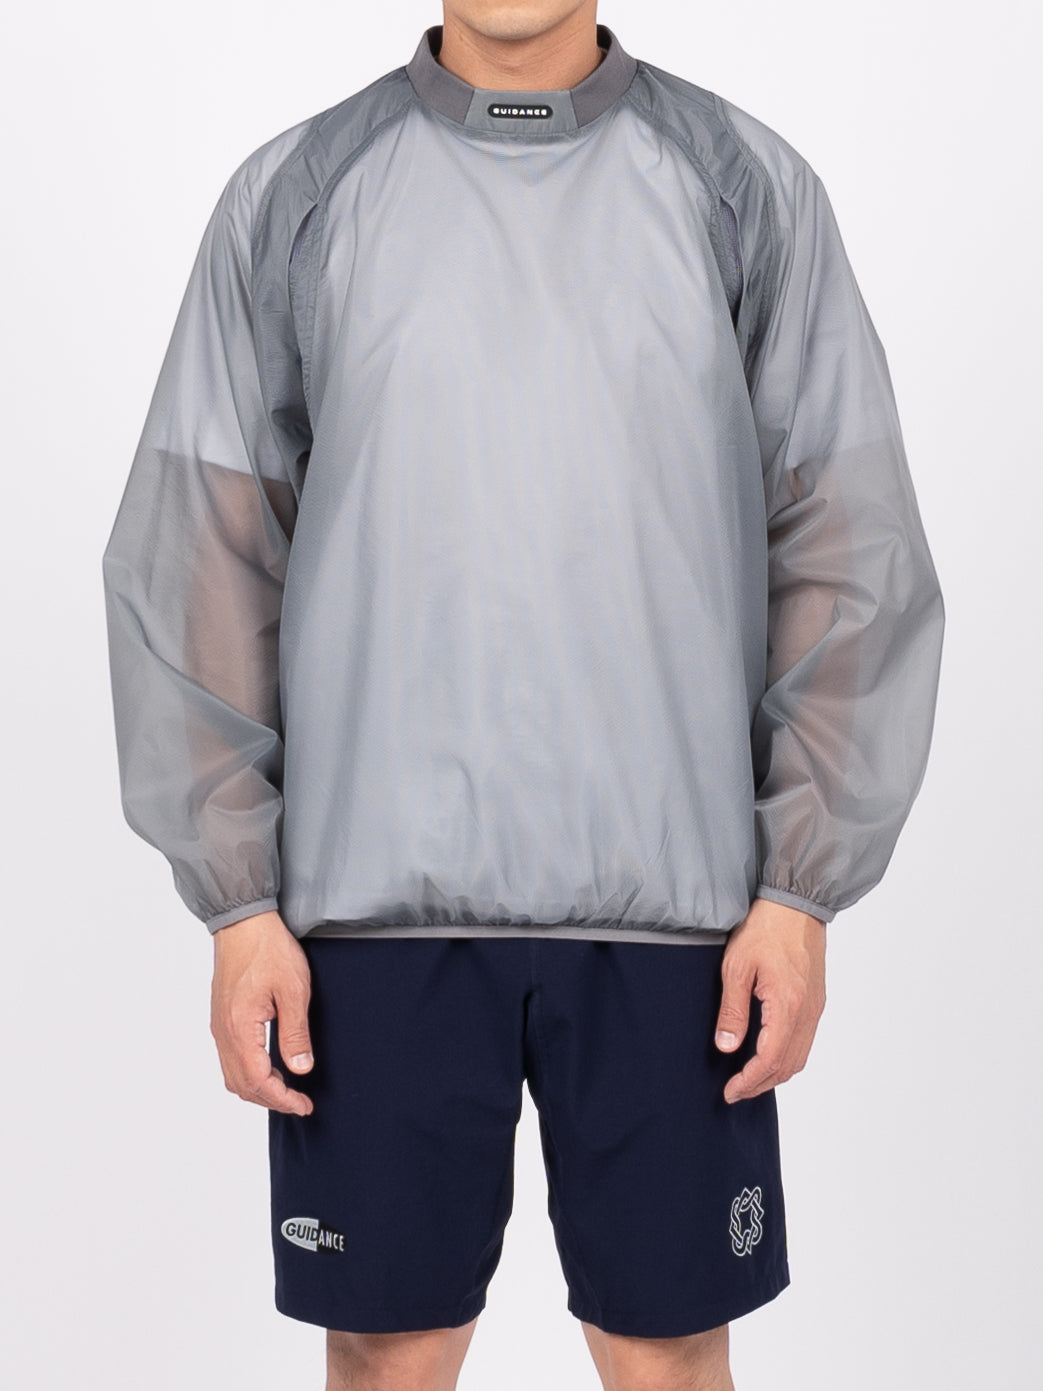 Lack of Guidance Christian Drill Top (Grey)